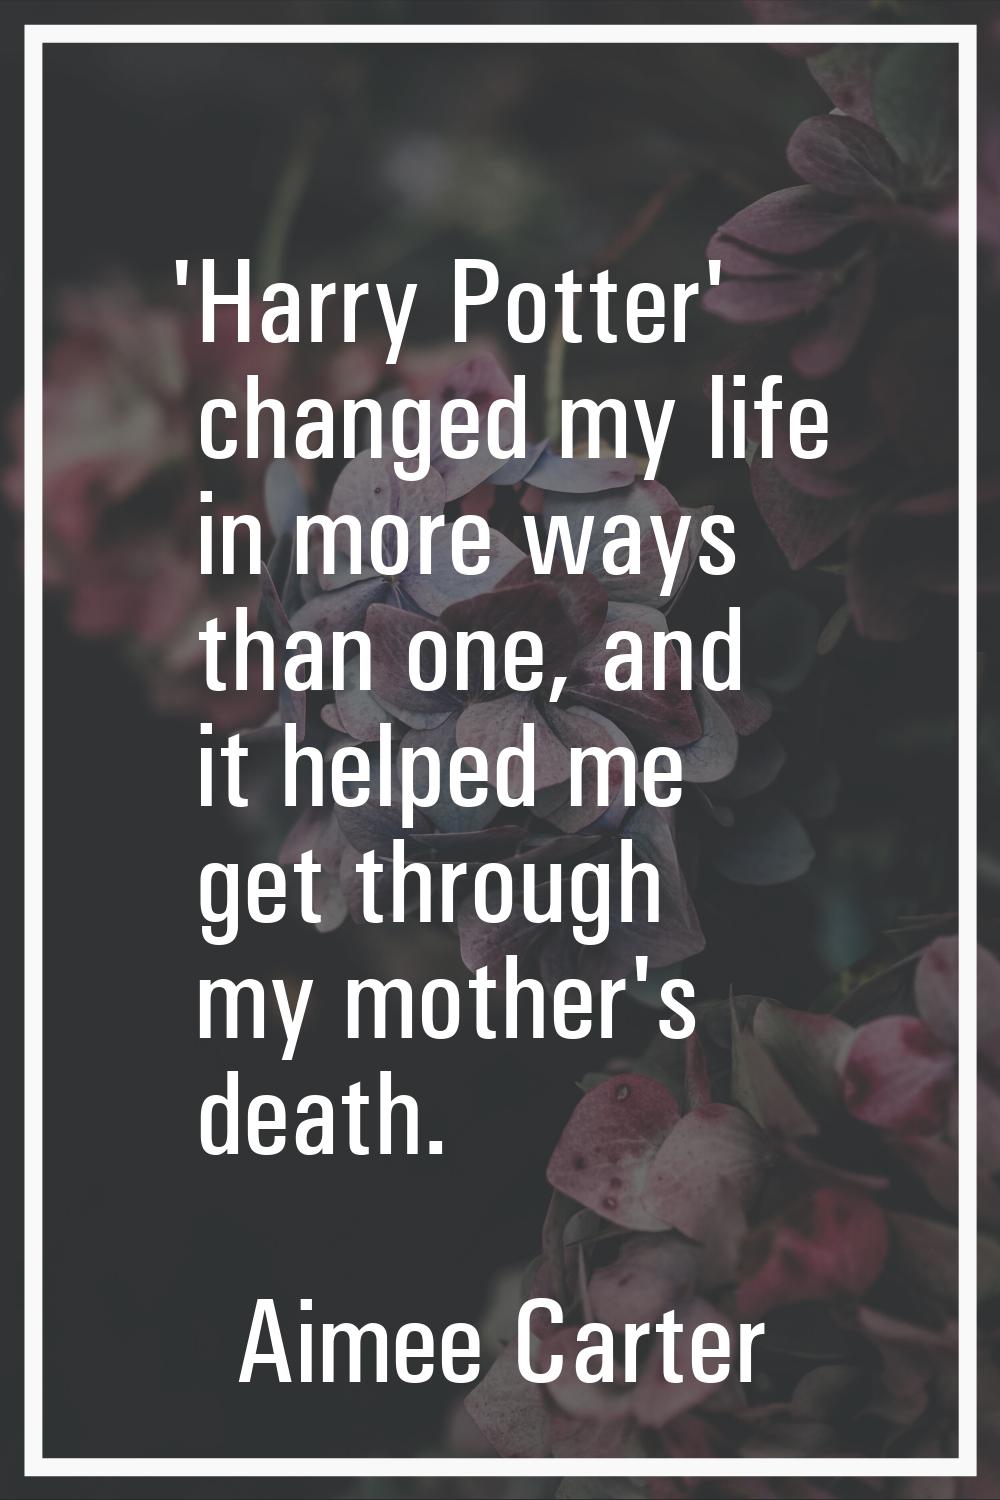 'Harry Potter' changed my life in more ways than one, and it helped me get through my mother's deat